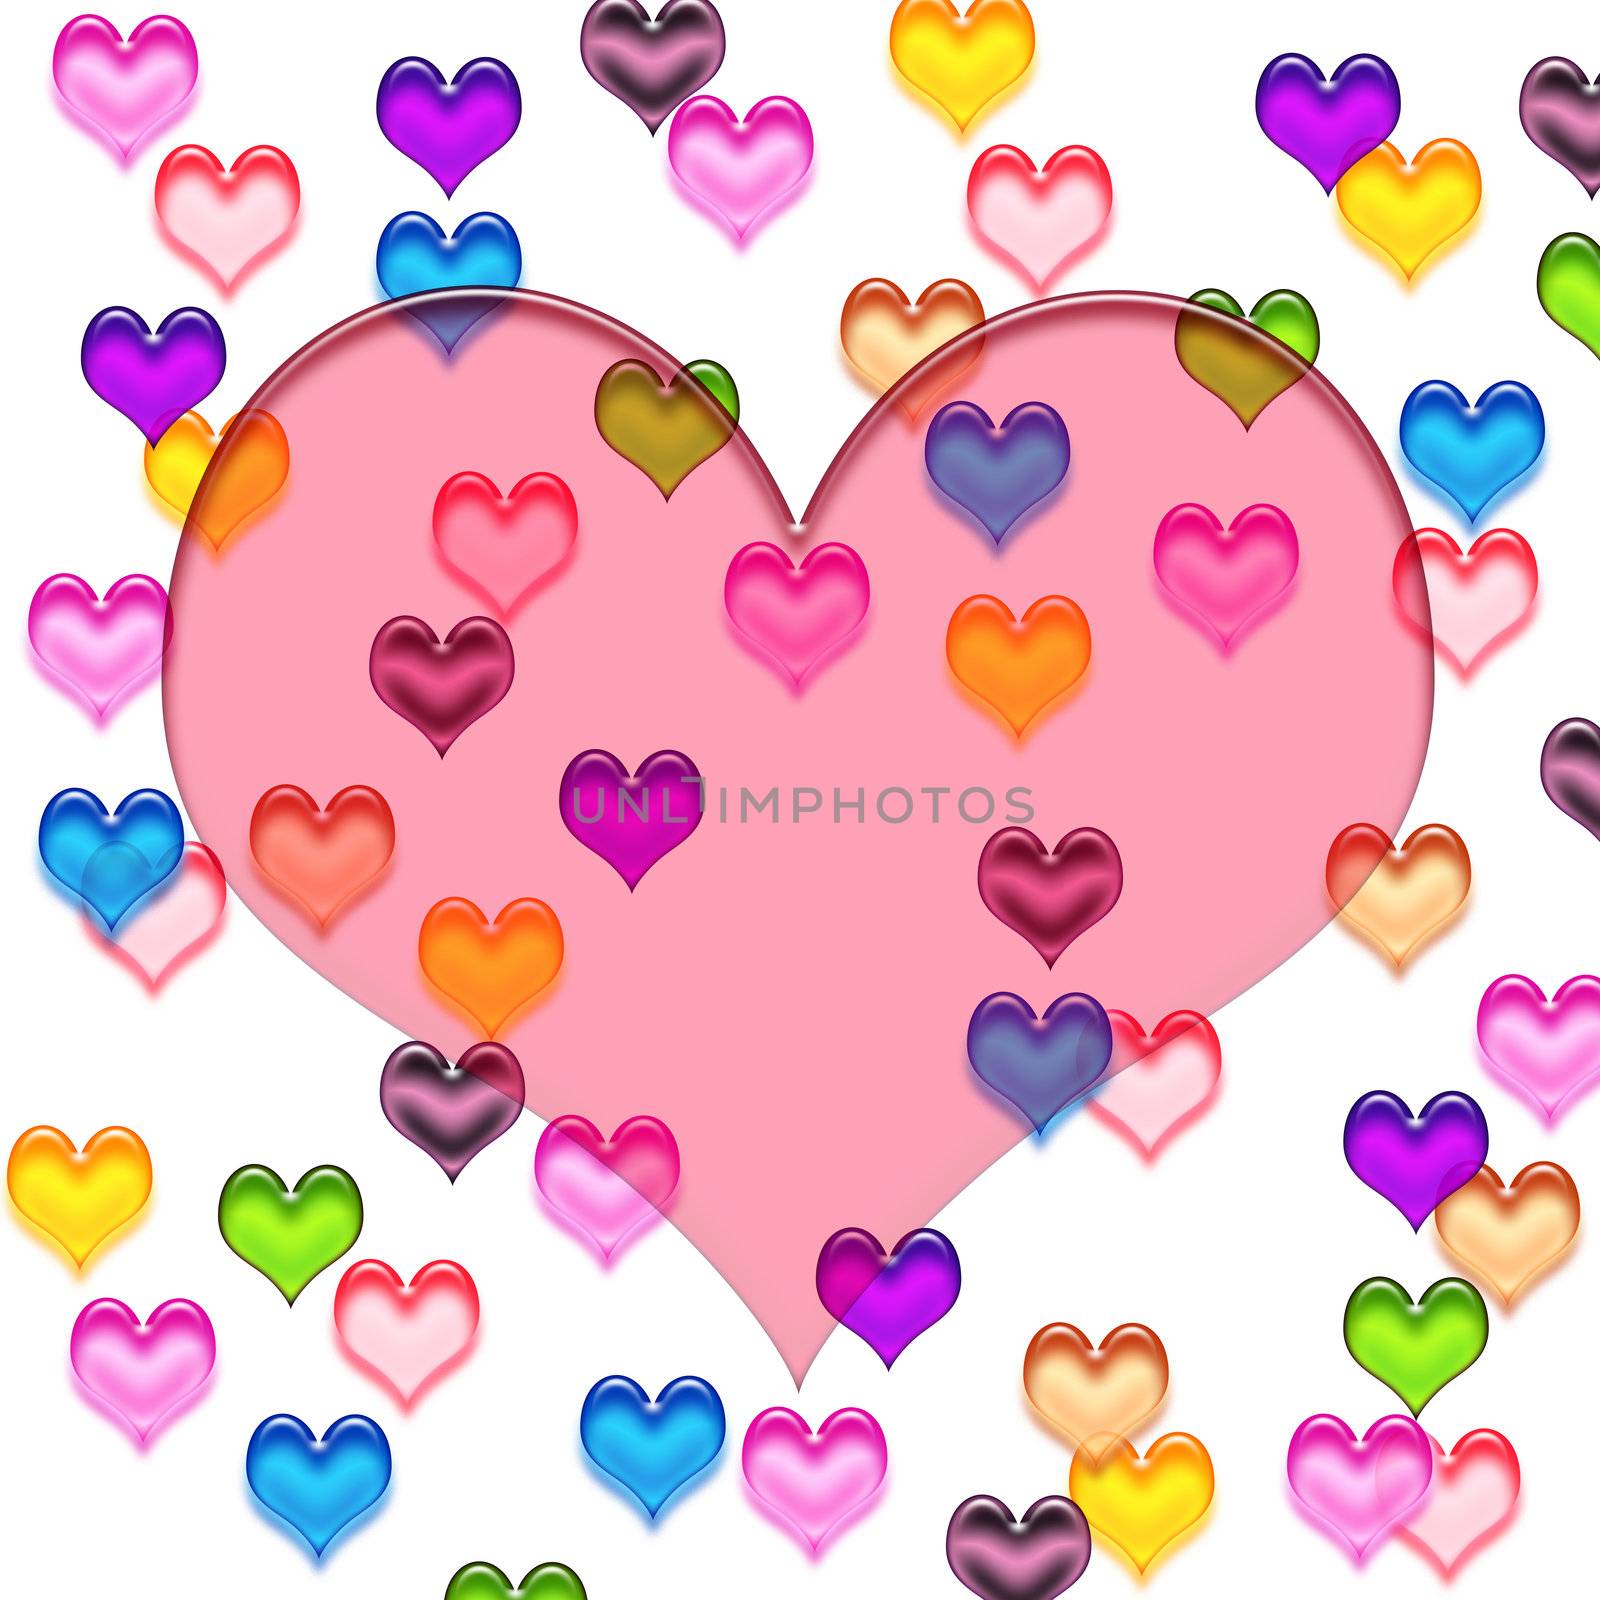 texture of transparent glassy hearts in bright colors